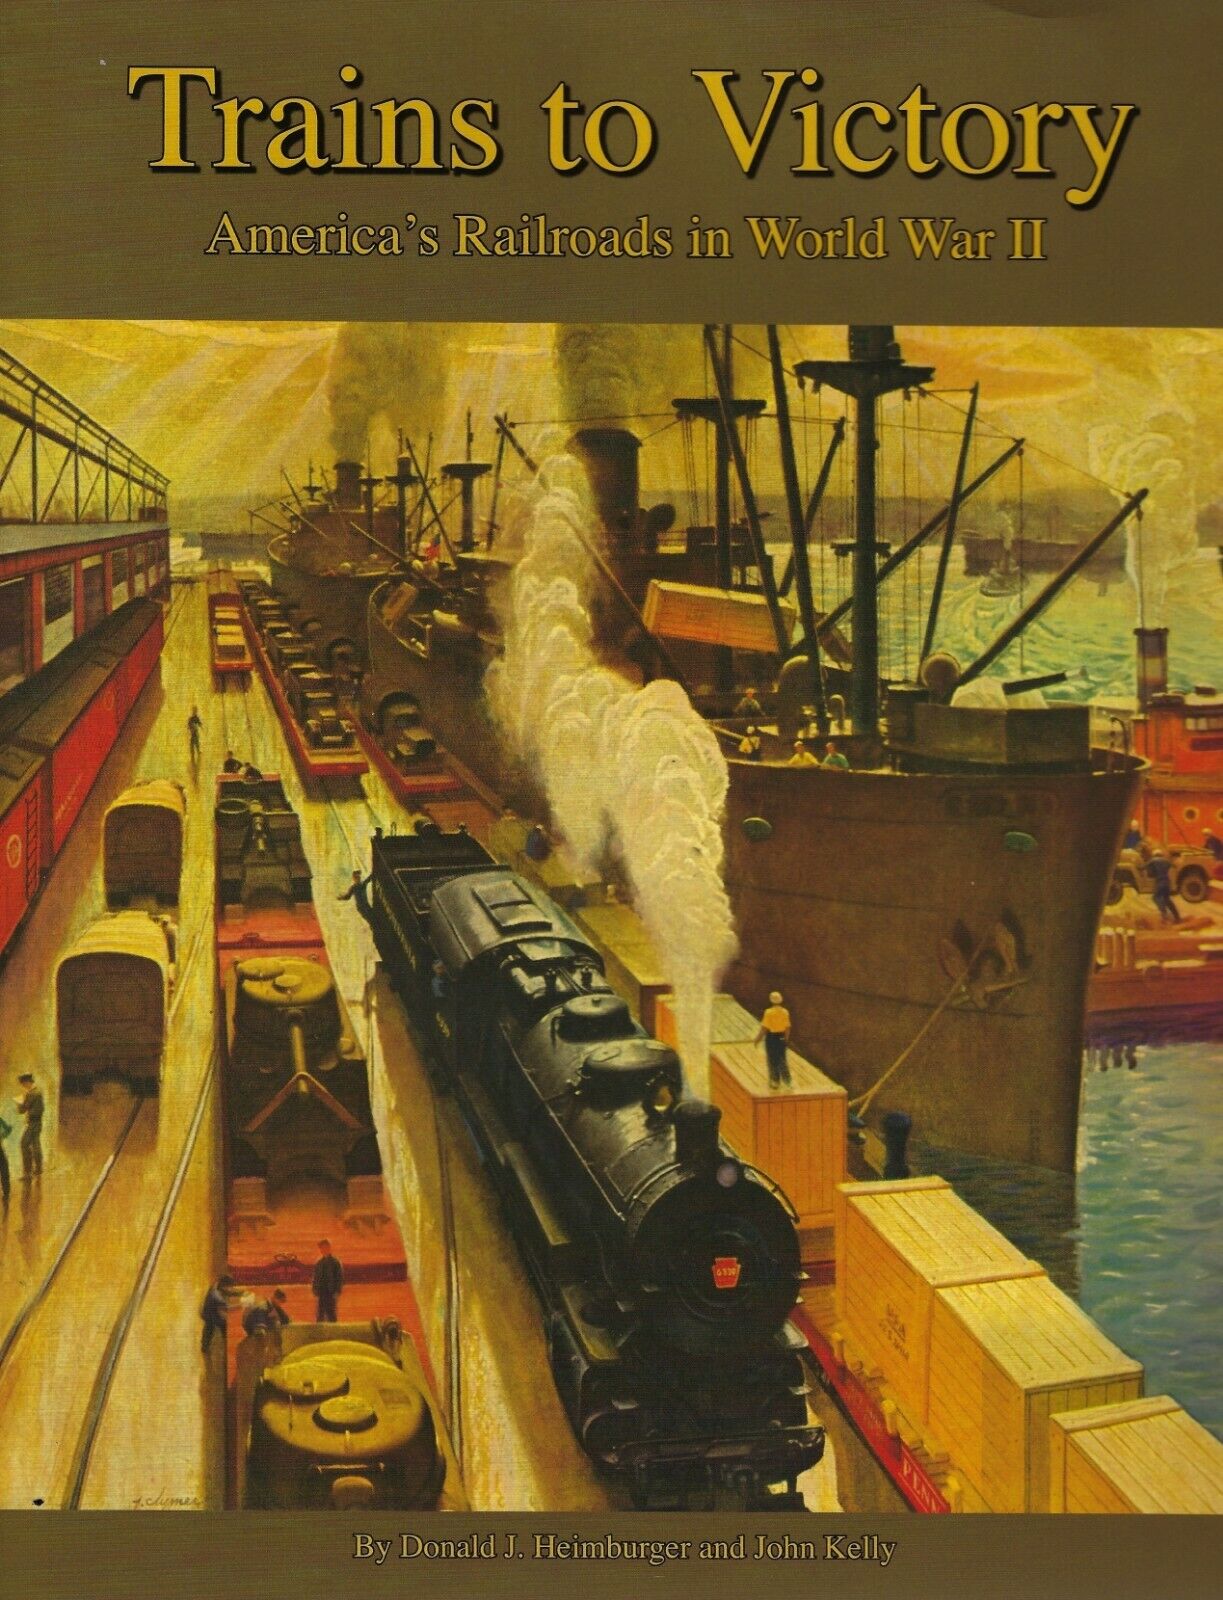 TRAINS TO VICTORY America’s Railroads in World War II NEW BOOK signed by authors